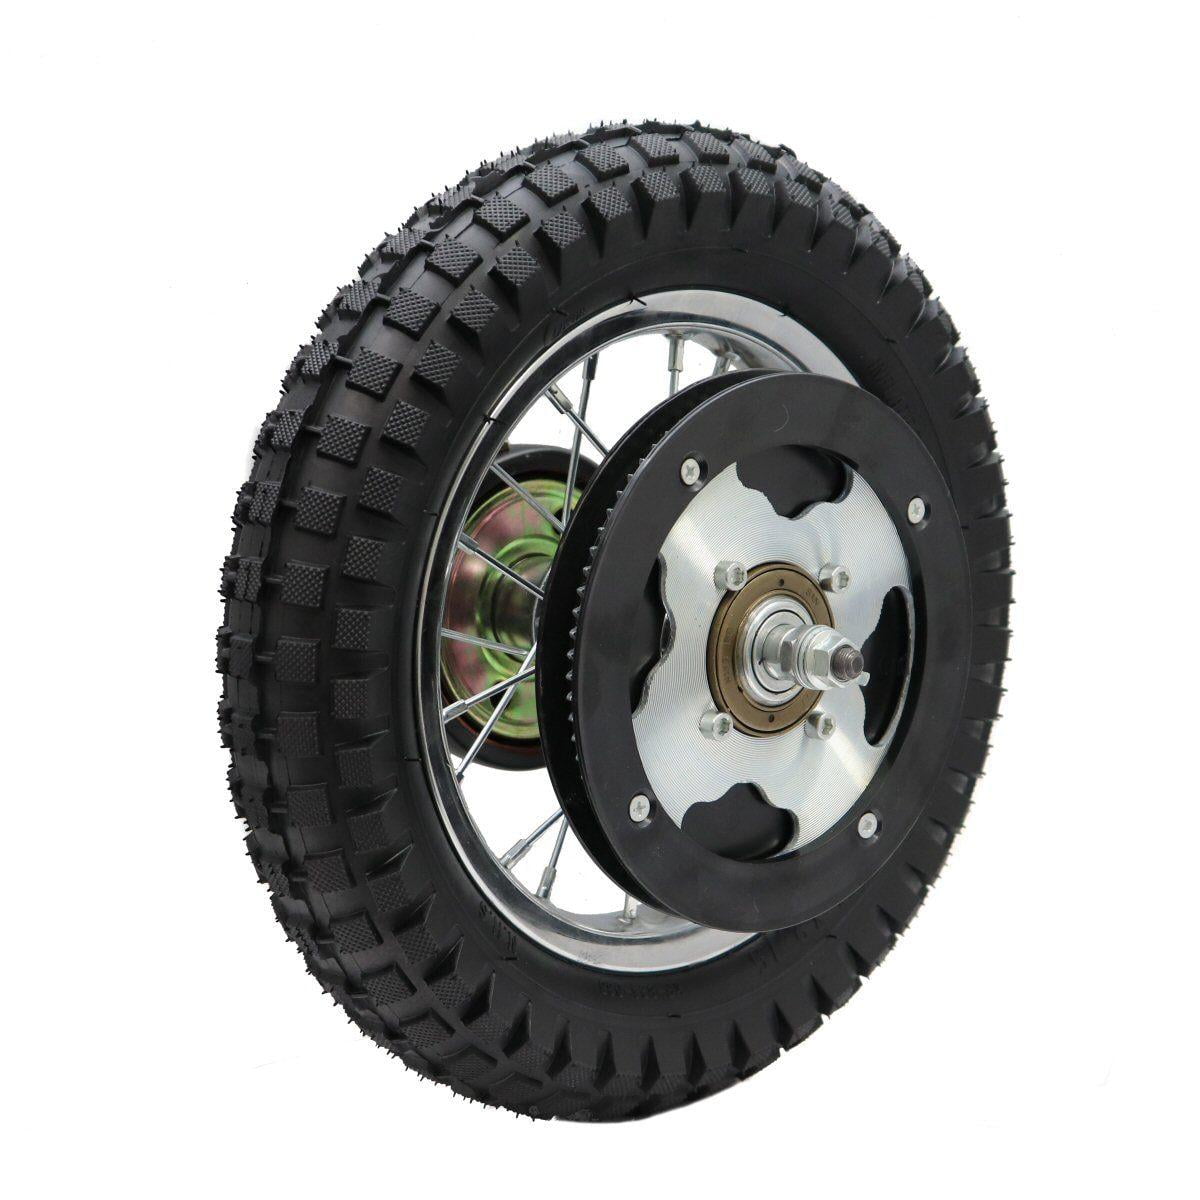 Replacement Rear Wheel Assembly for the Razor MX500 & MX650 Dirt Rocket. 